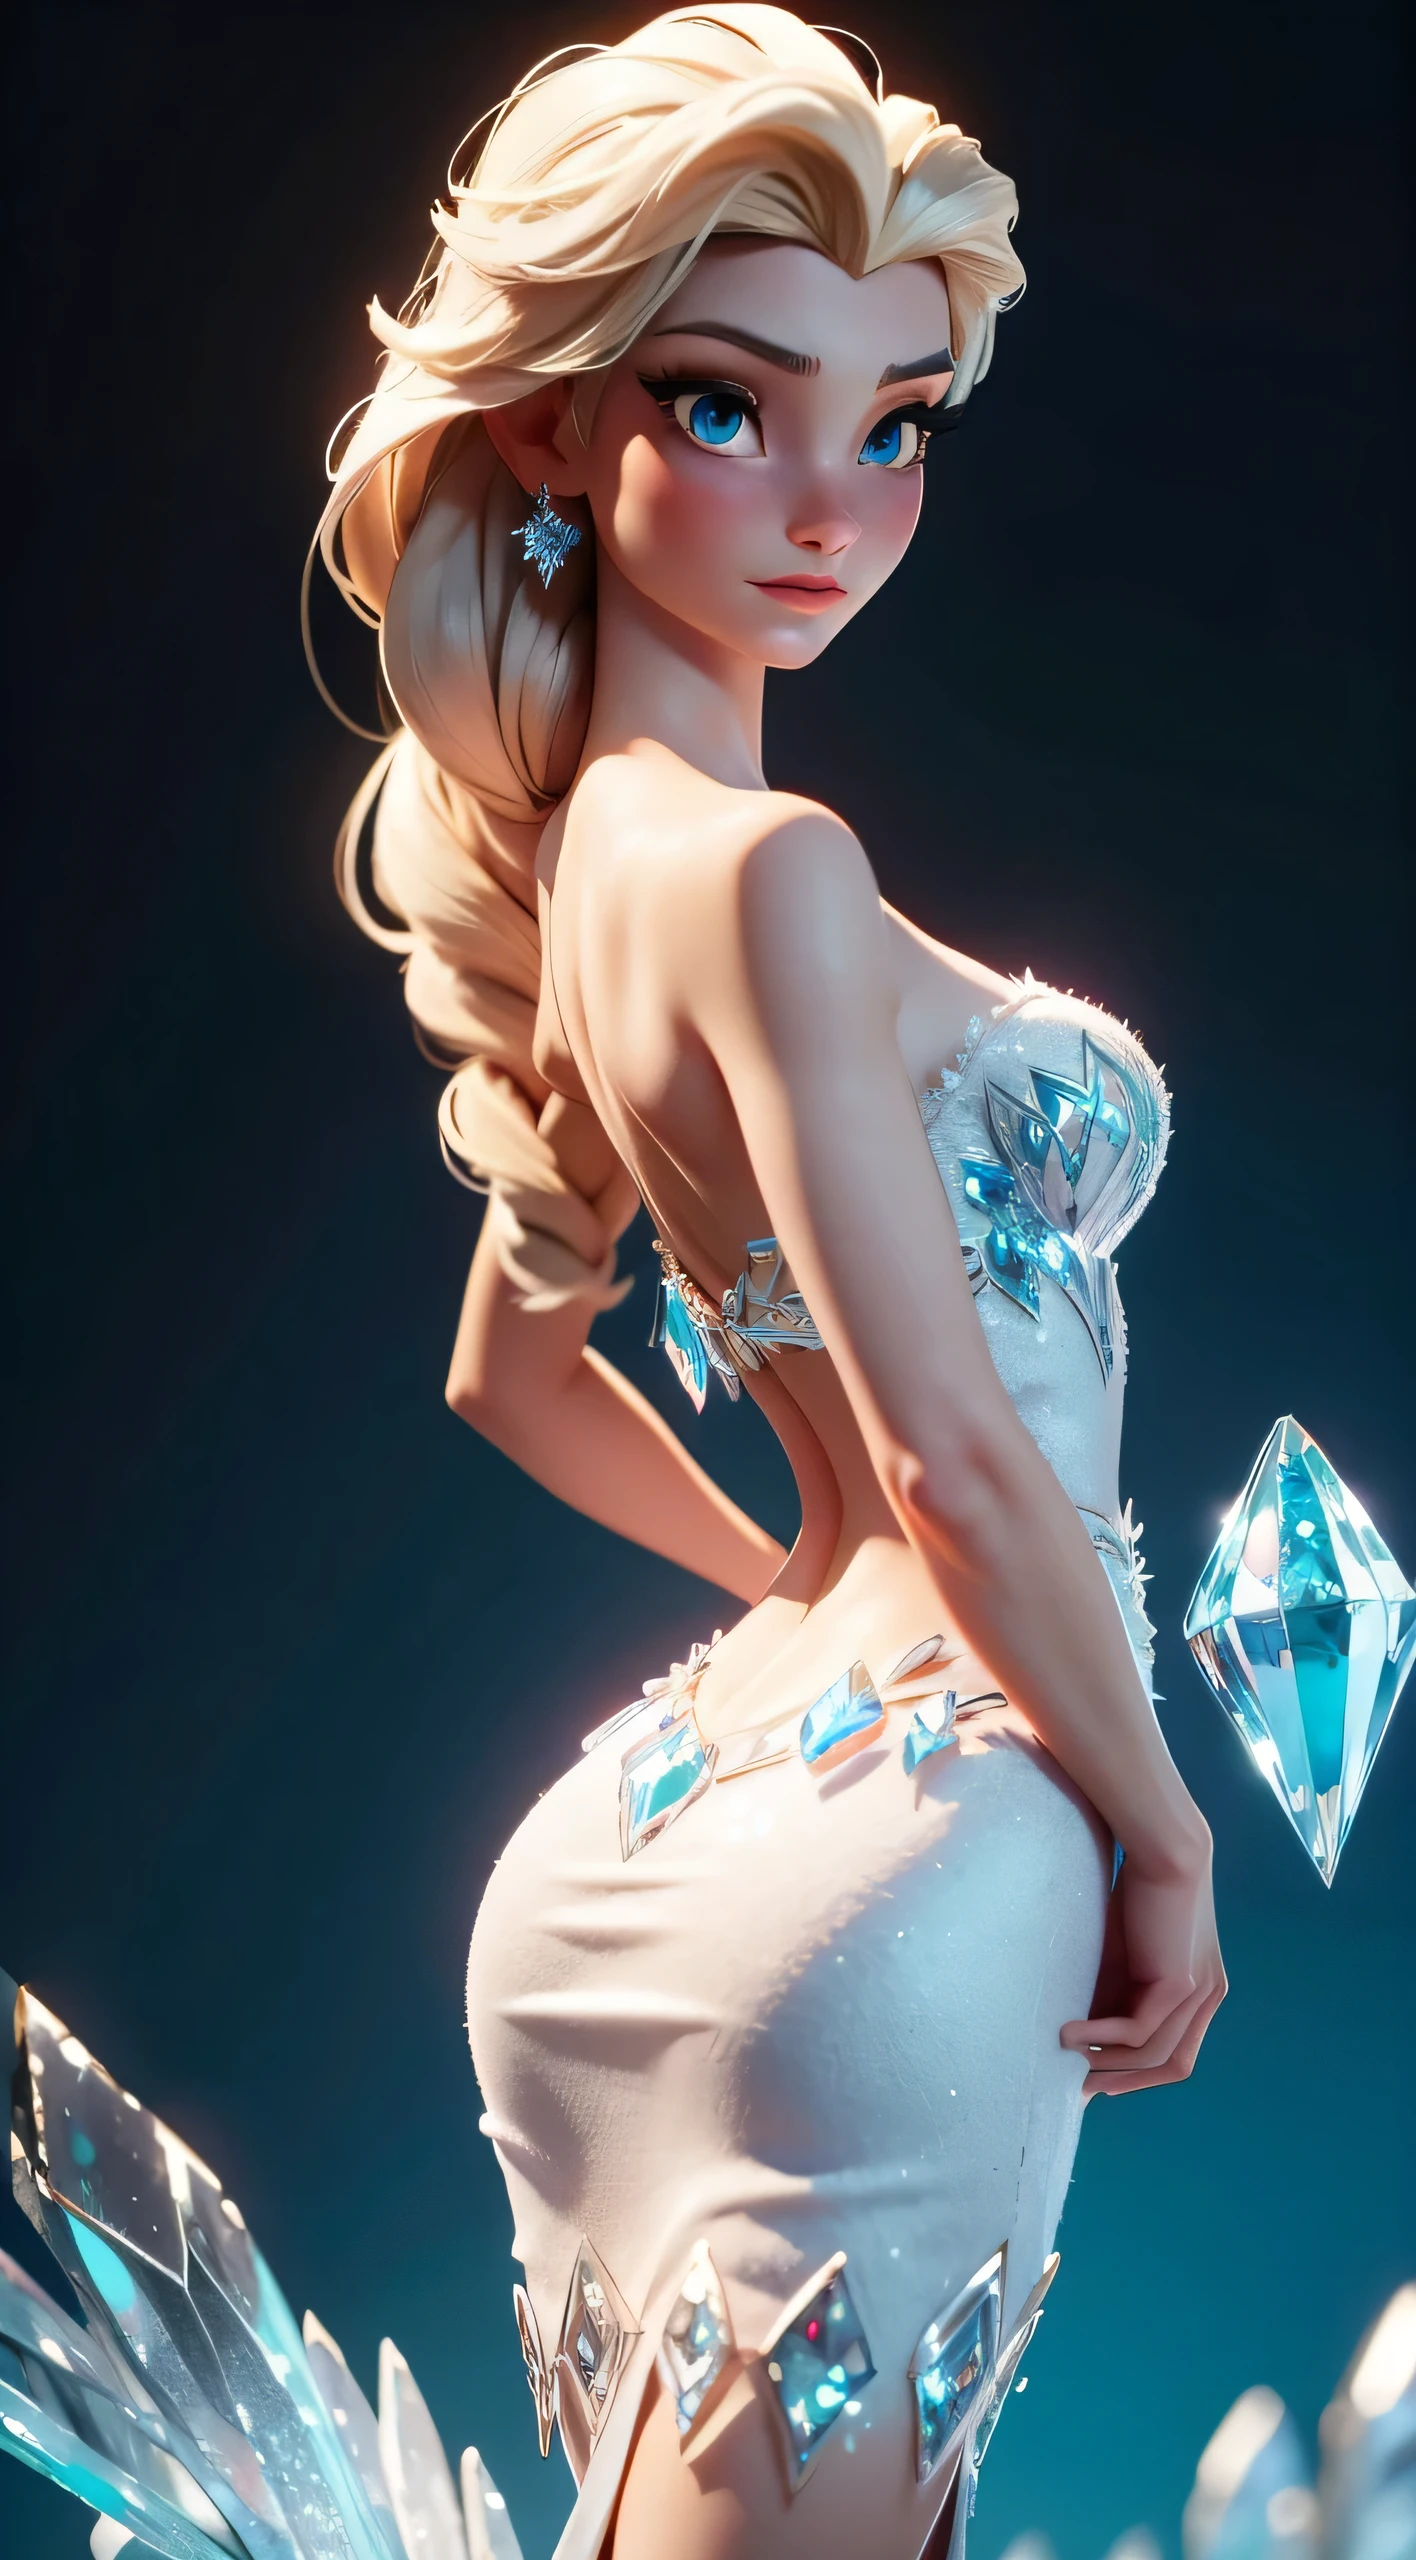 Envision Elsa in a graceful pose, Ice crystal chest ice chest Elsa, her back partially arched, showcasing the elegance of her Blue Diamond (Crystal) Dress from Frozen. This scene is inspired by the LORA Model Elsa, capturing the beauty of a realistic animated 3D representation. The image is a partial back arch, chest up, highlighting the intricate details of Elsa's dress and the regal posture of the Frozen queen. With lifelike realism, Elsa's expression and pose convey a sense of enchantment and grace,